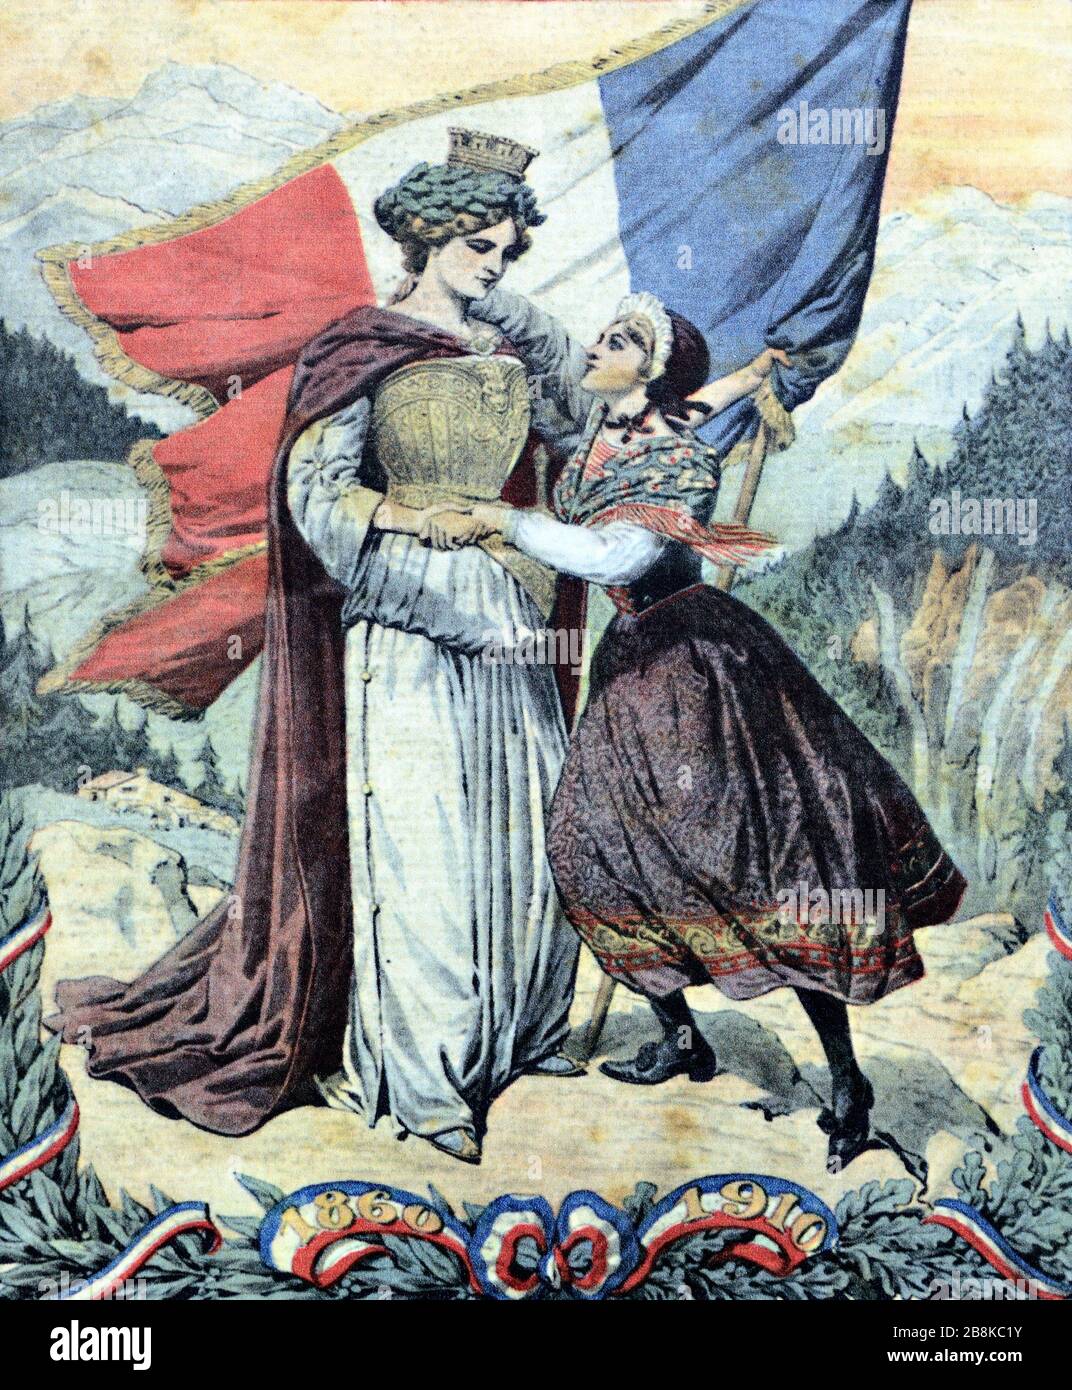 French Nationalist or Patriotic Illustration Showing the Annexation or Attachment of Savoie or Savoy to France in 1860 Stock Photo